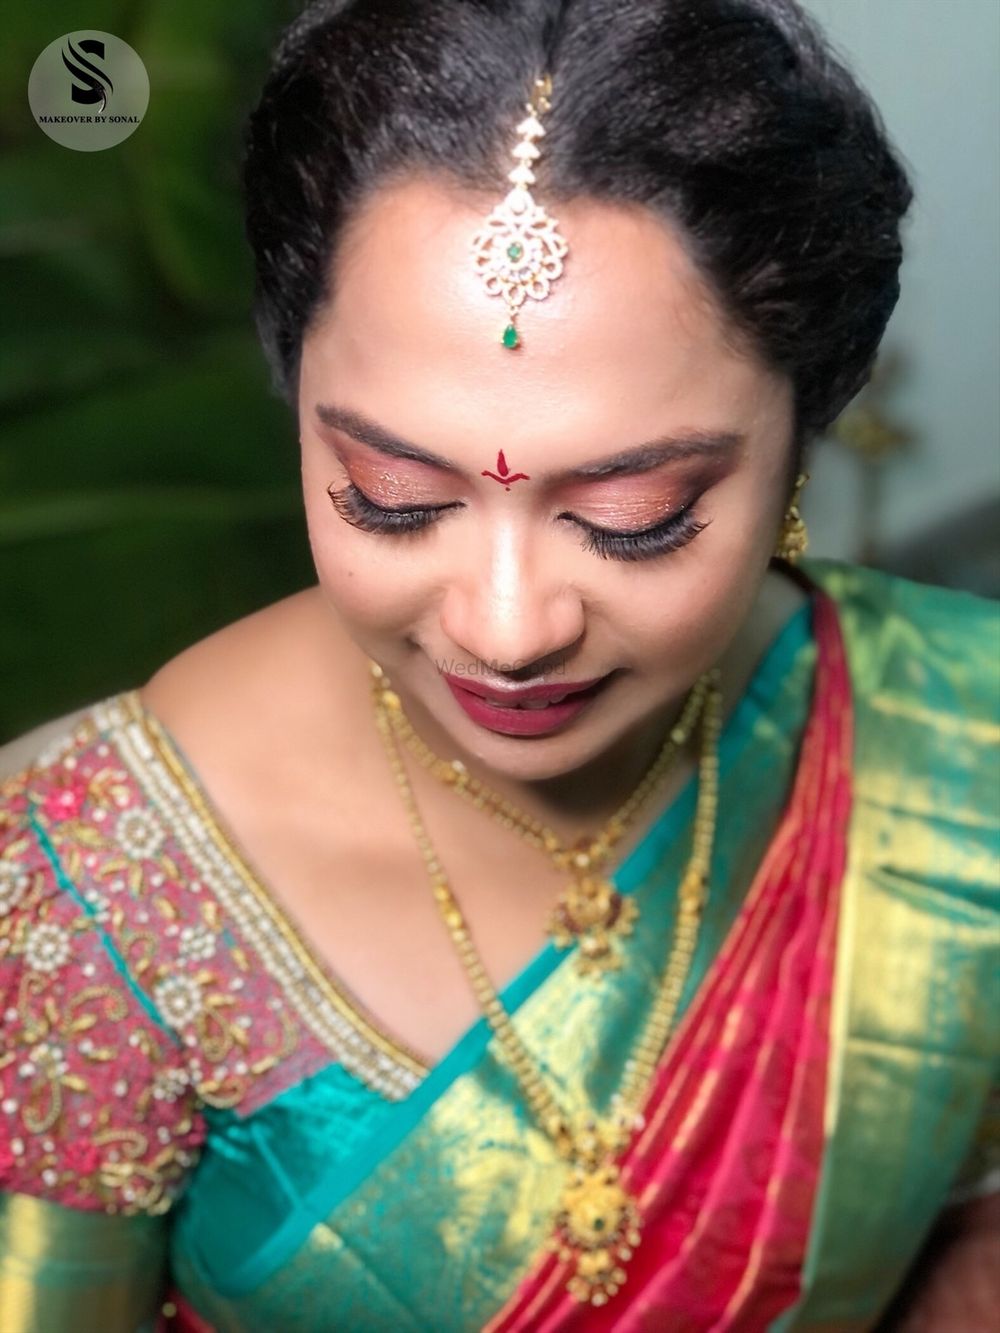 Photo From AirBrush Bridal Makeovers - By Makeover by Sonal